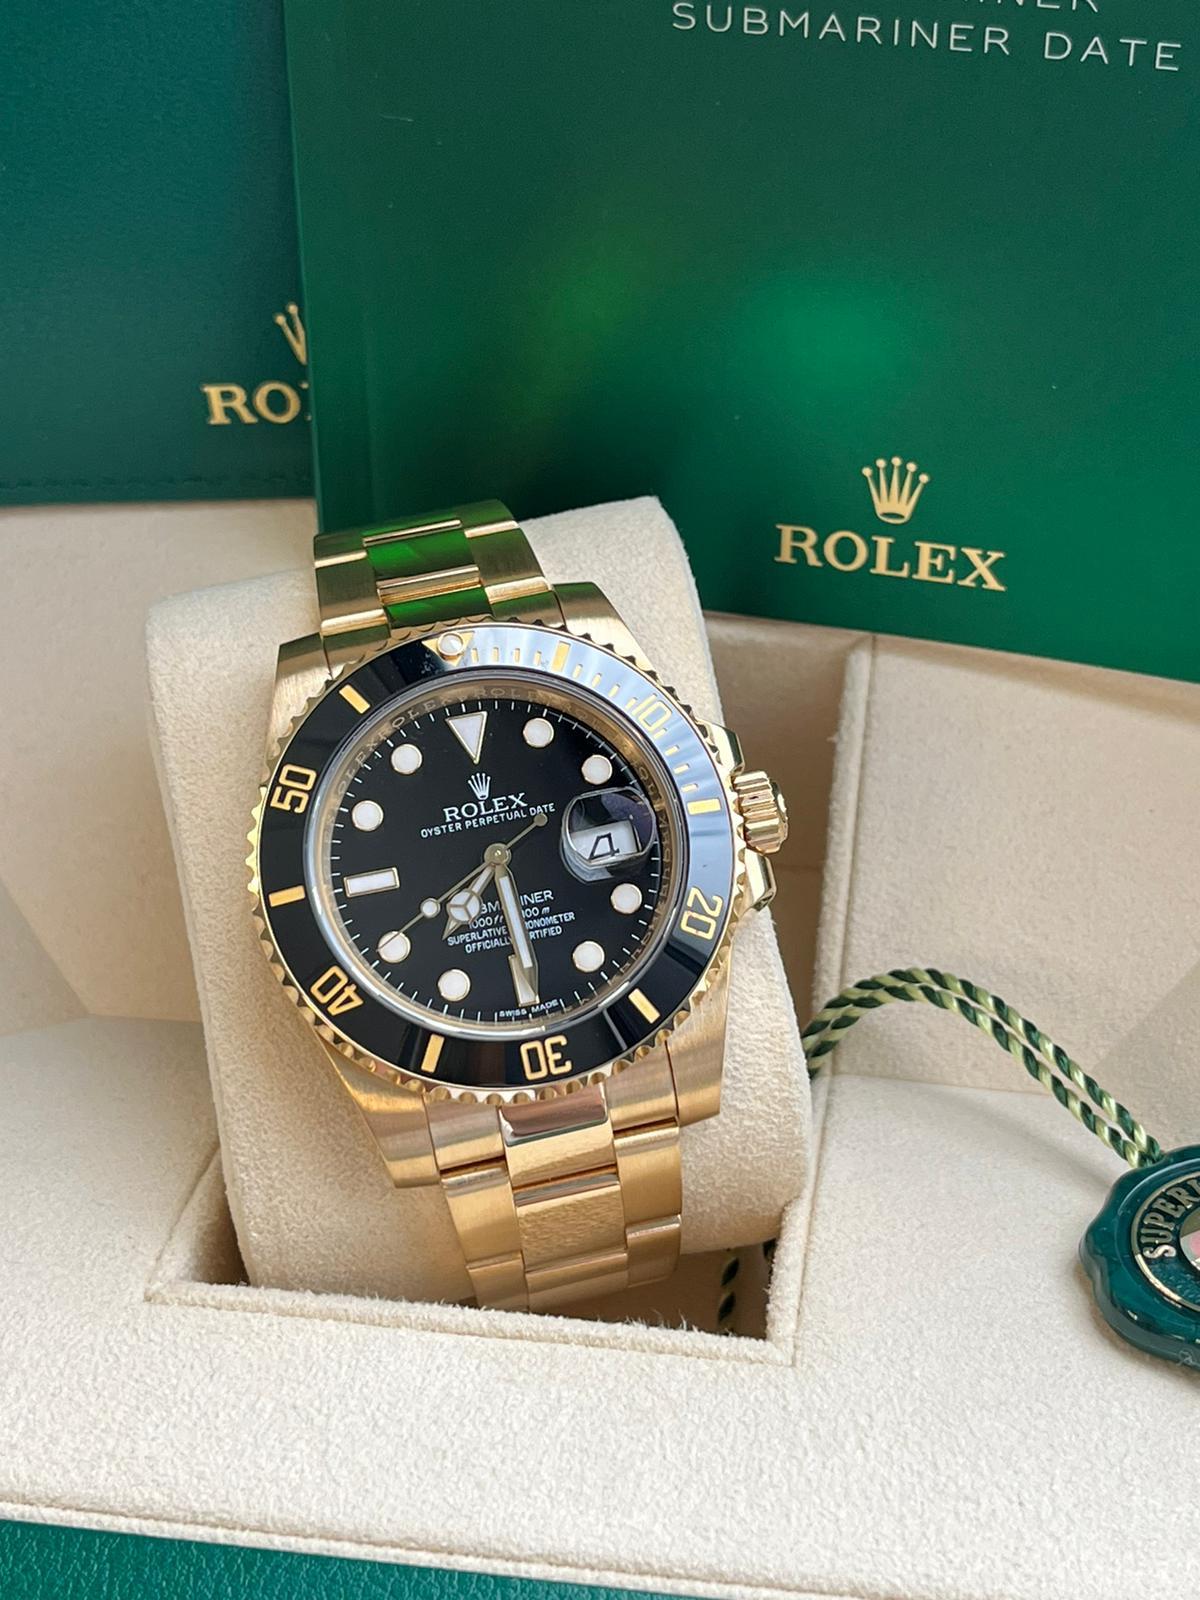 Rolex Submariner Date Automatic Yellow Gold Black Dial Men's Watch 116618LN In Excellent Condition For Sale In Aventura, FL